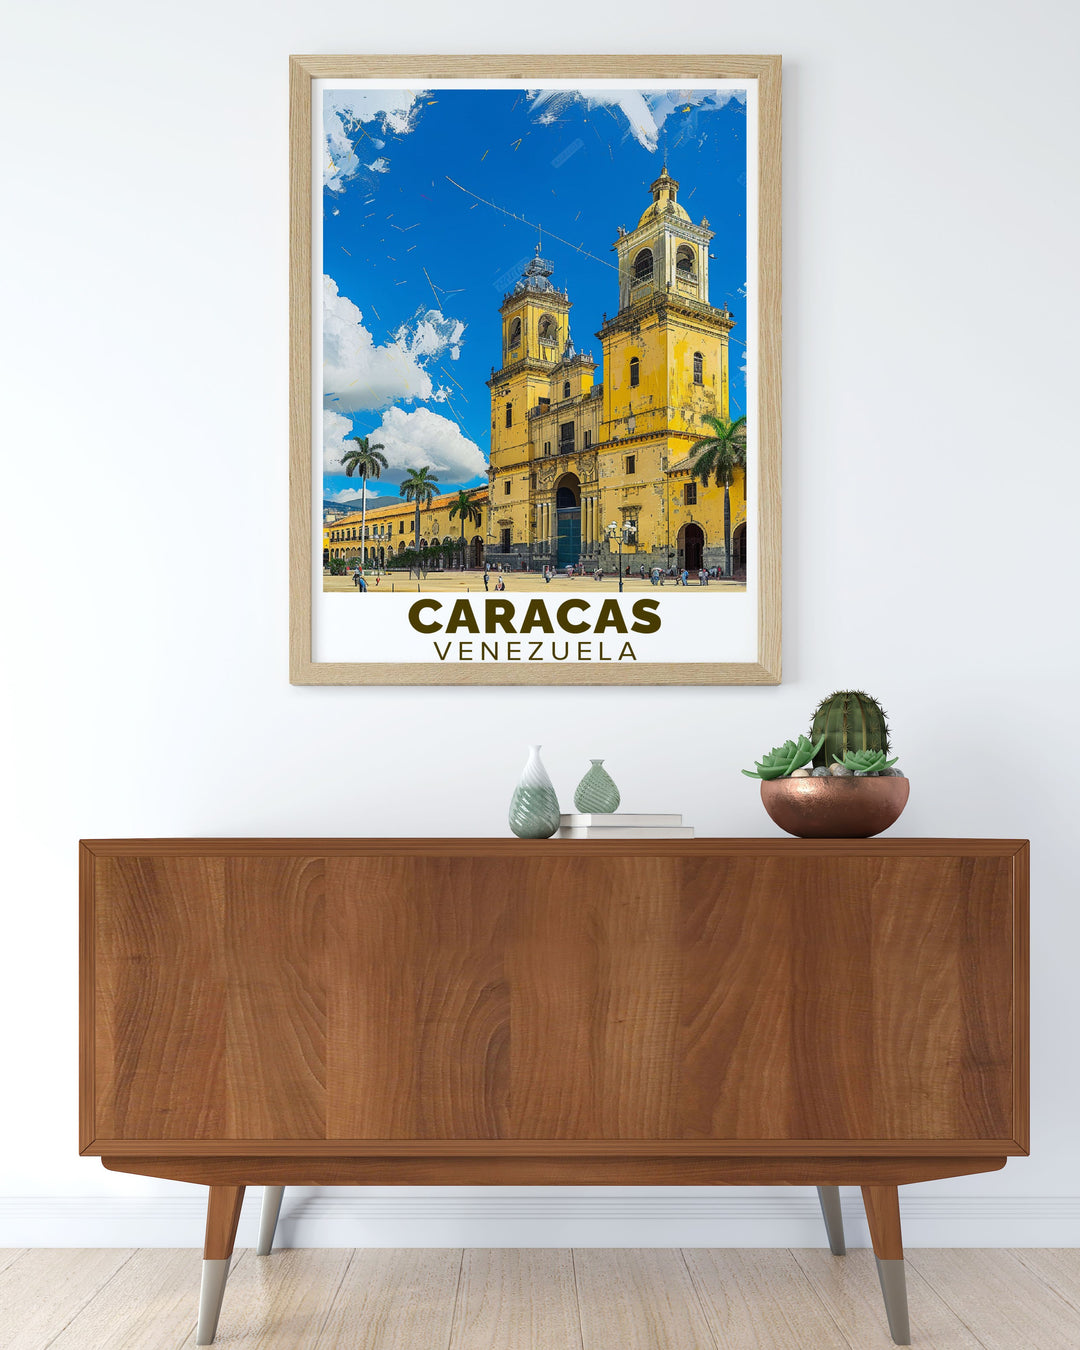 This poster artfully depicts Plaza Bolivar and its role as a central landmark in Caracas, offering a perfect blend of historical marvels and urban landscapes for your decor.